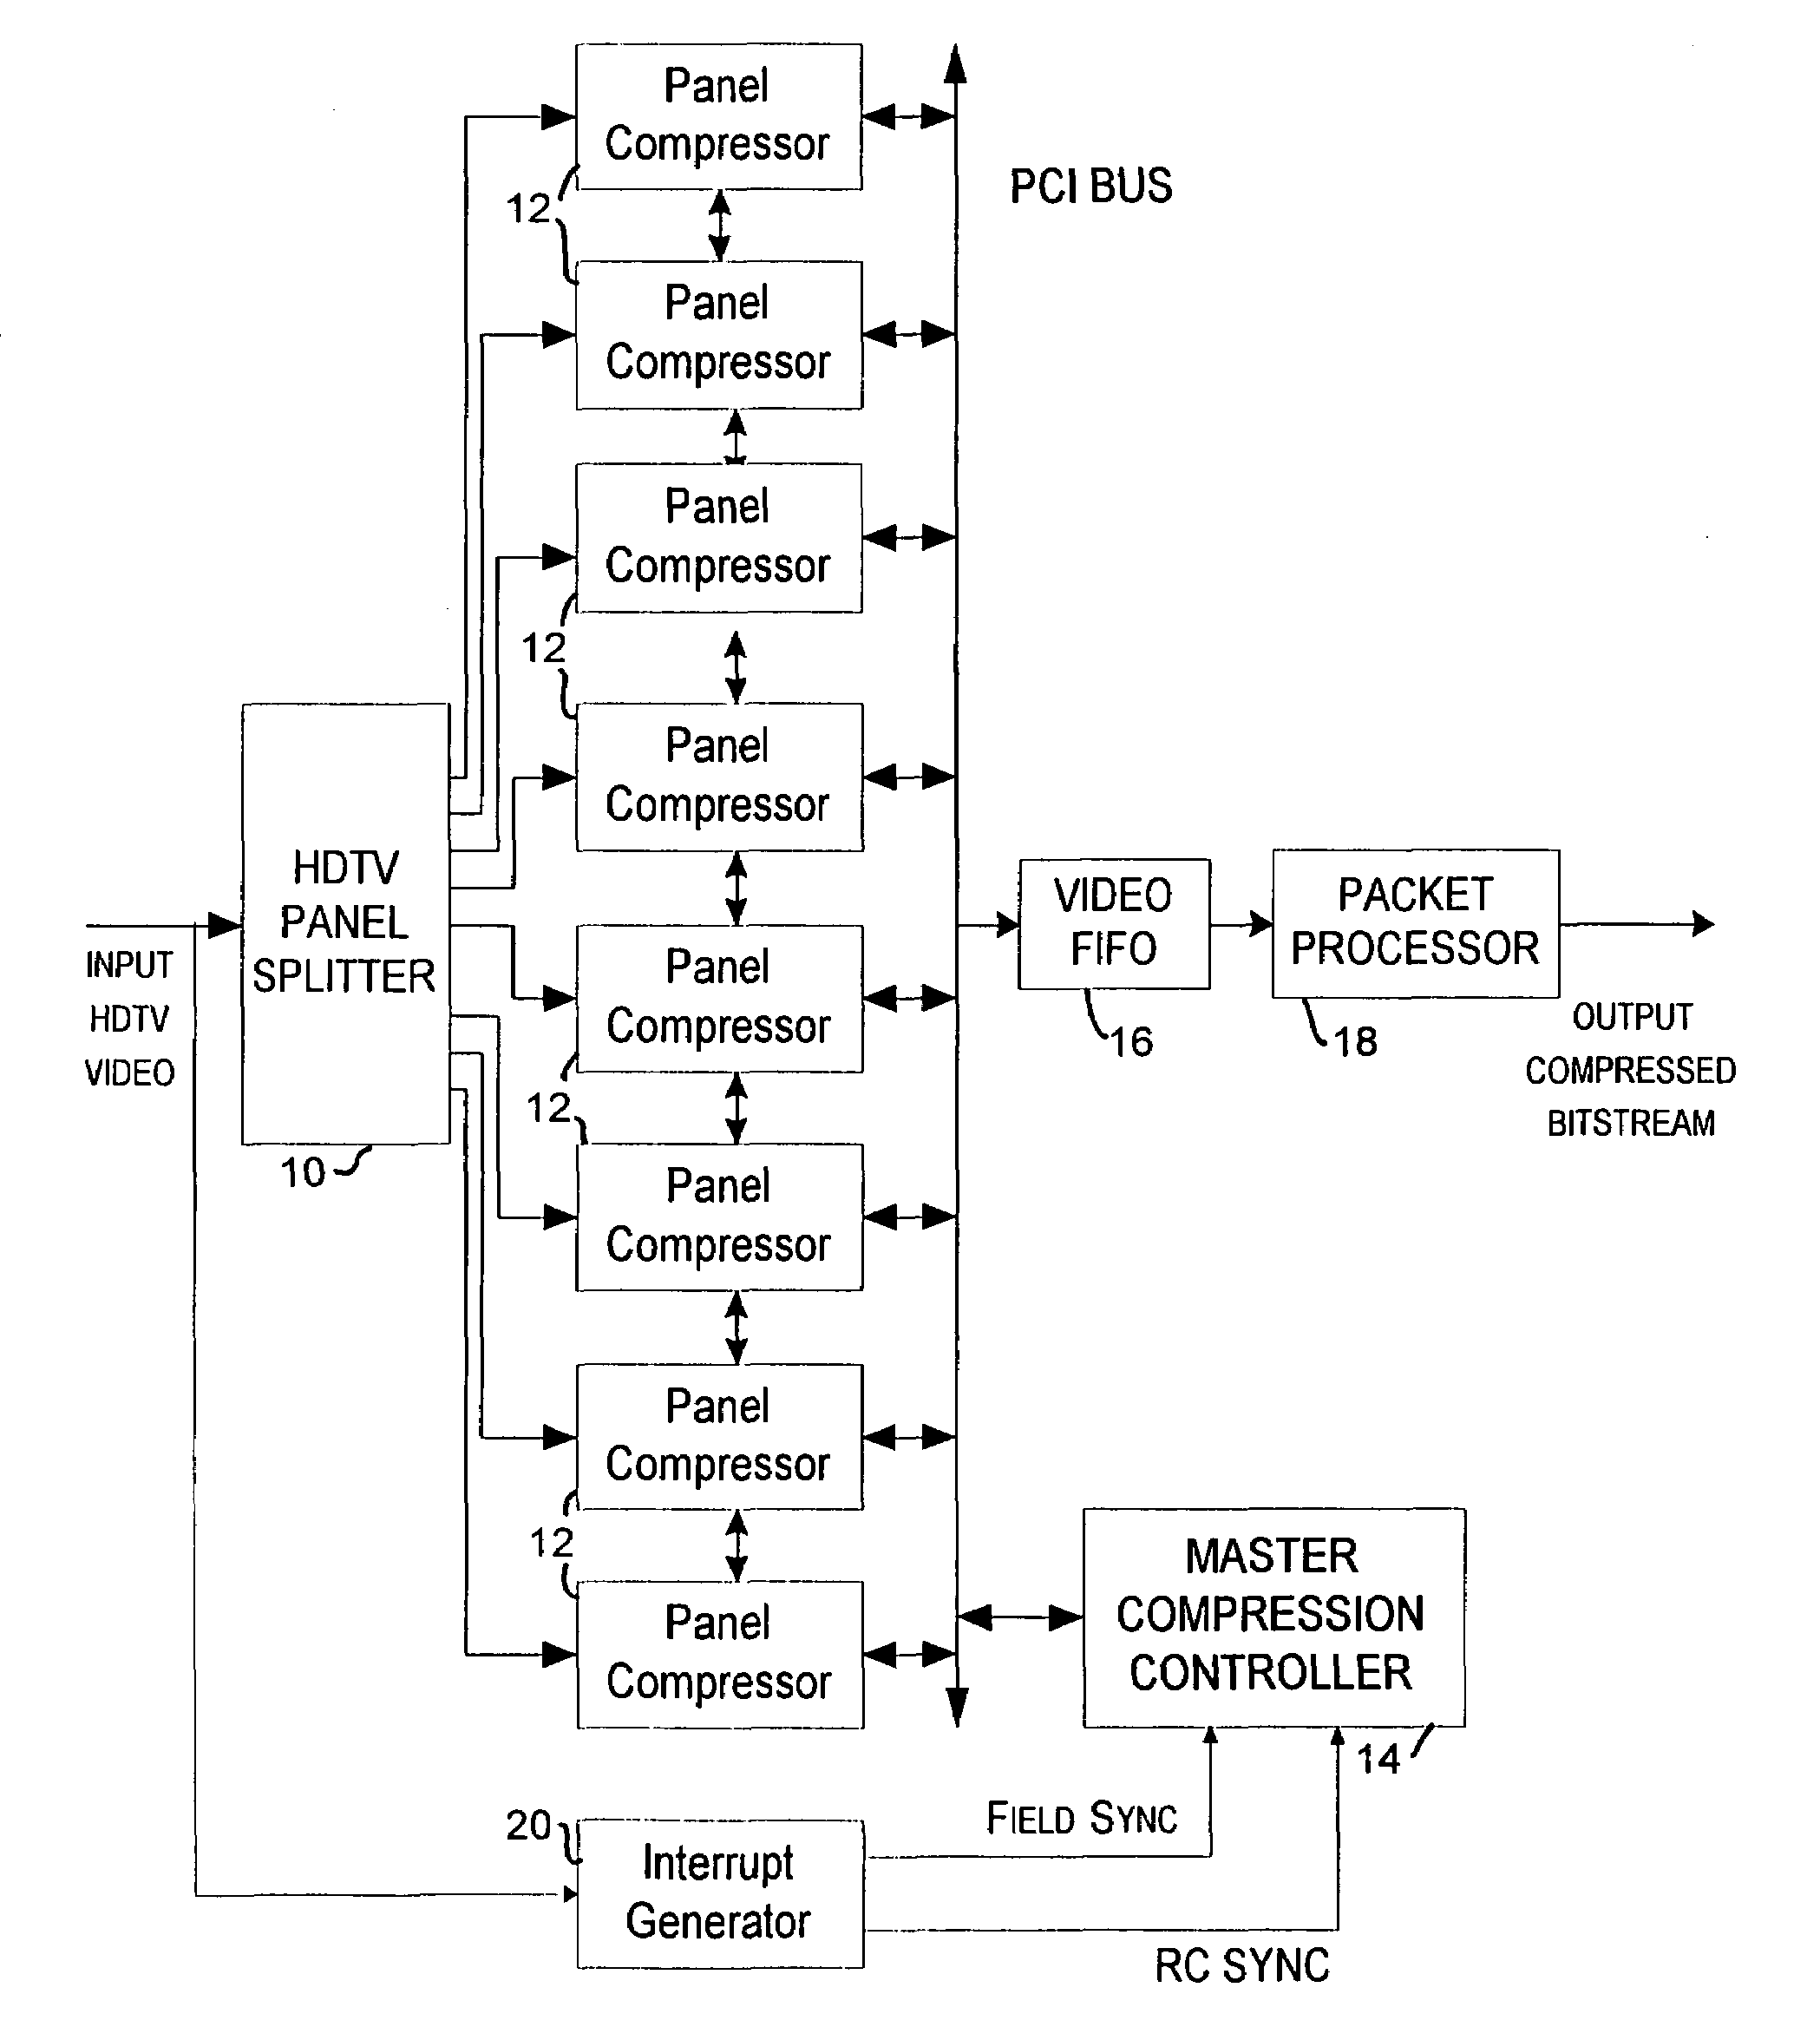 Method and apparatus for providing rate control in a video encoder